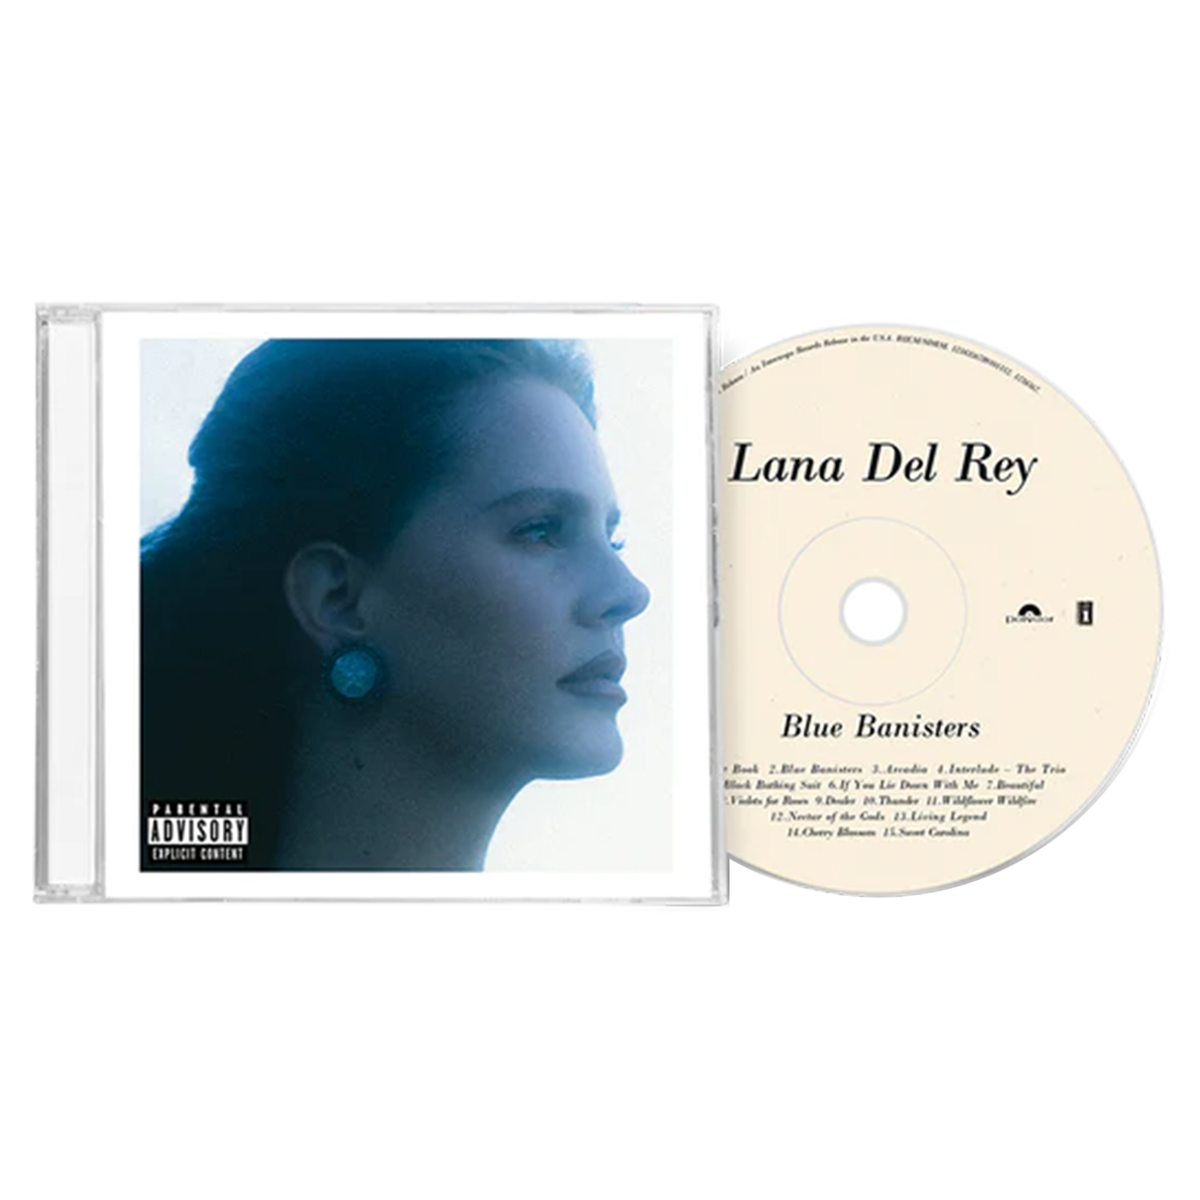 Lana Del Rey - BLUE BANISTERS EXCLUSIVE CD #2